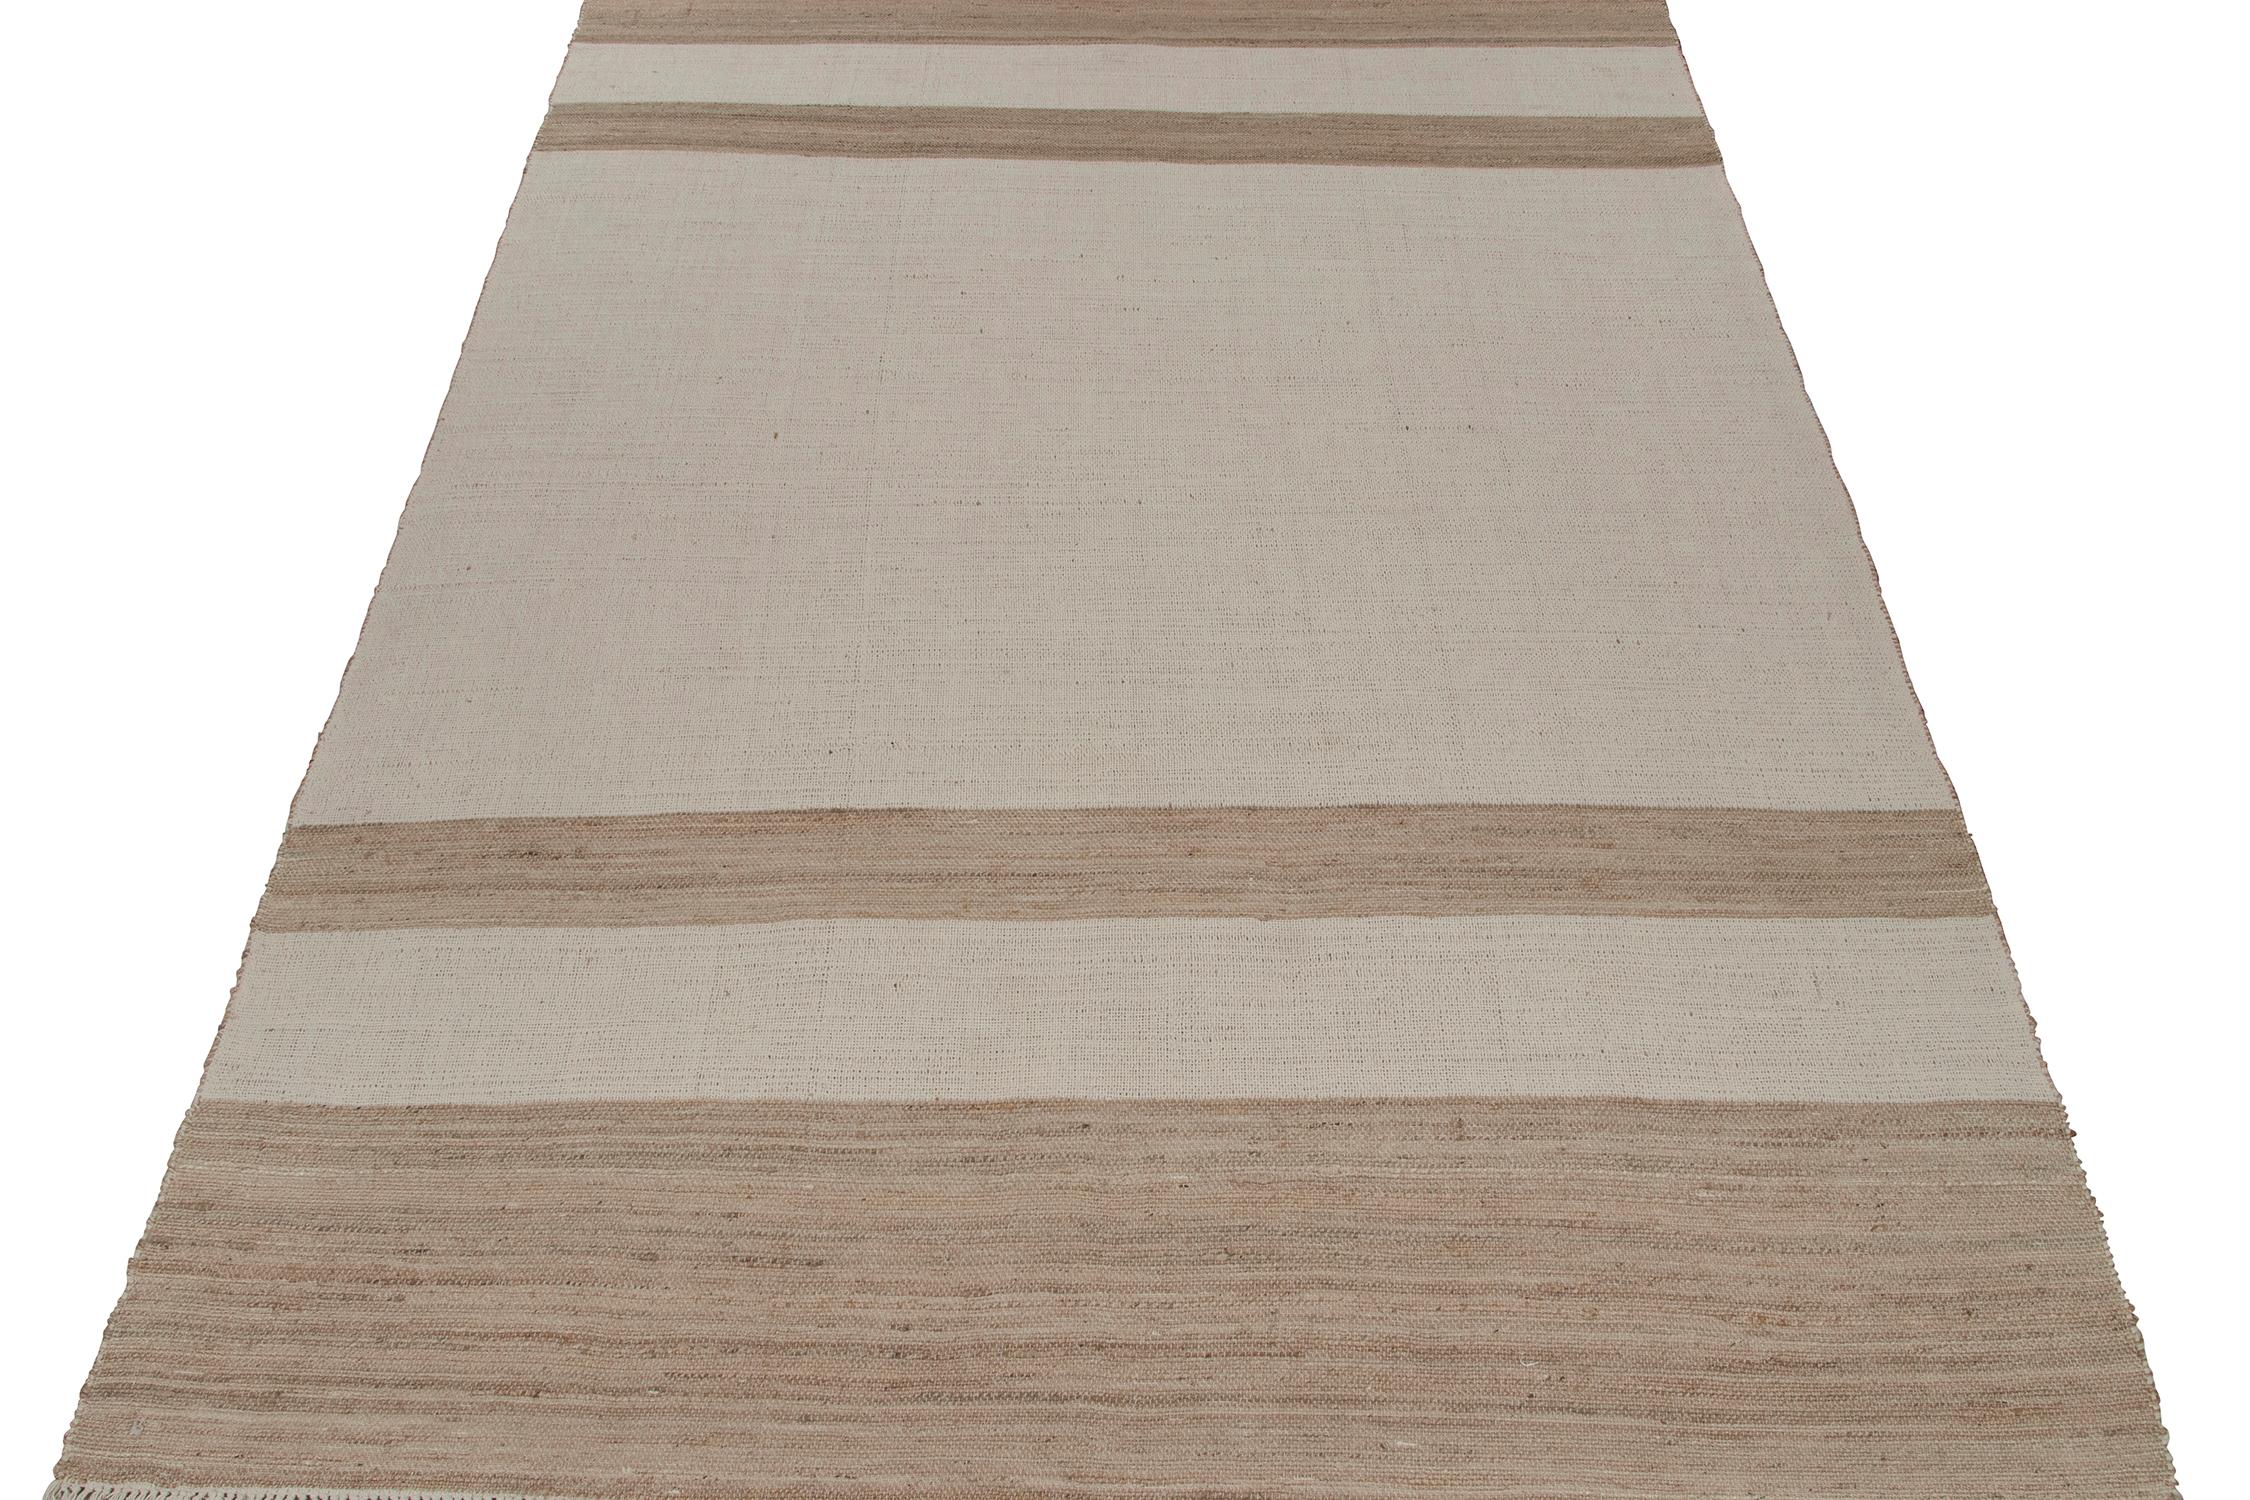 Indian Rug & Kilim’s Contemporary Jute Kilim in White and Beige-Brown Stripes For Sale